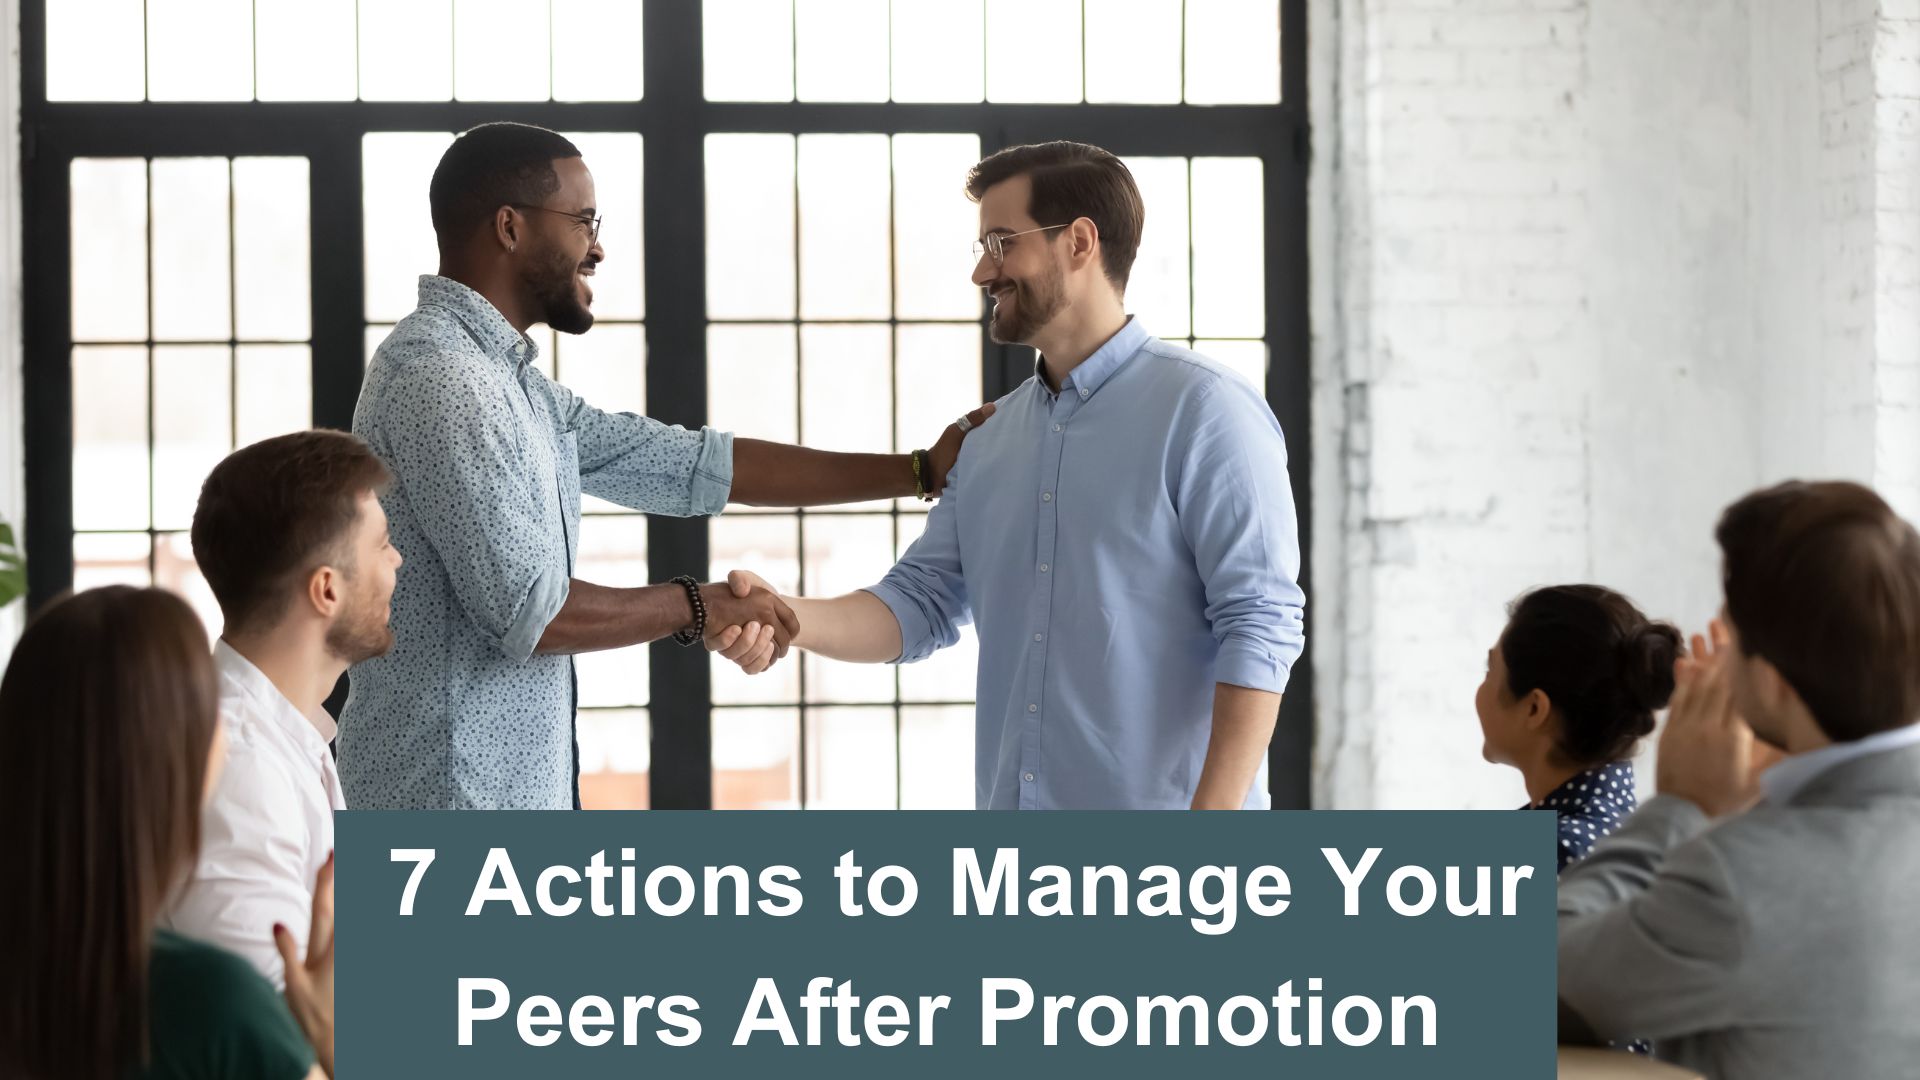 7 actions to manage your peers after promotion